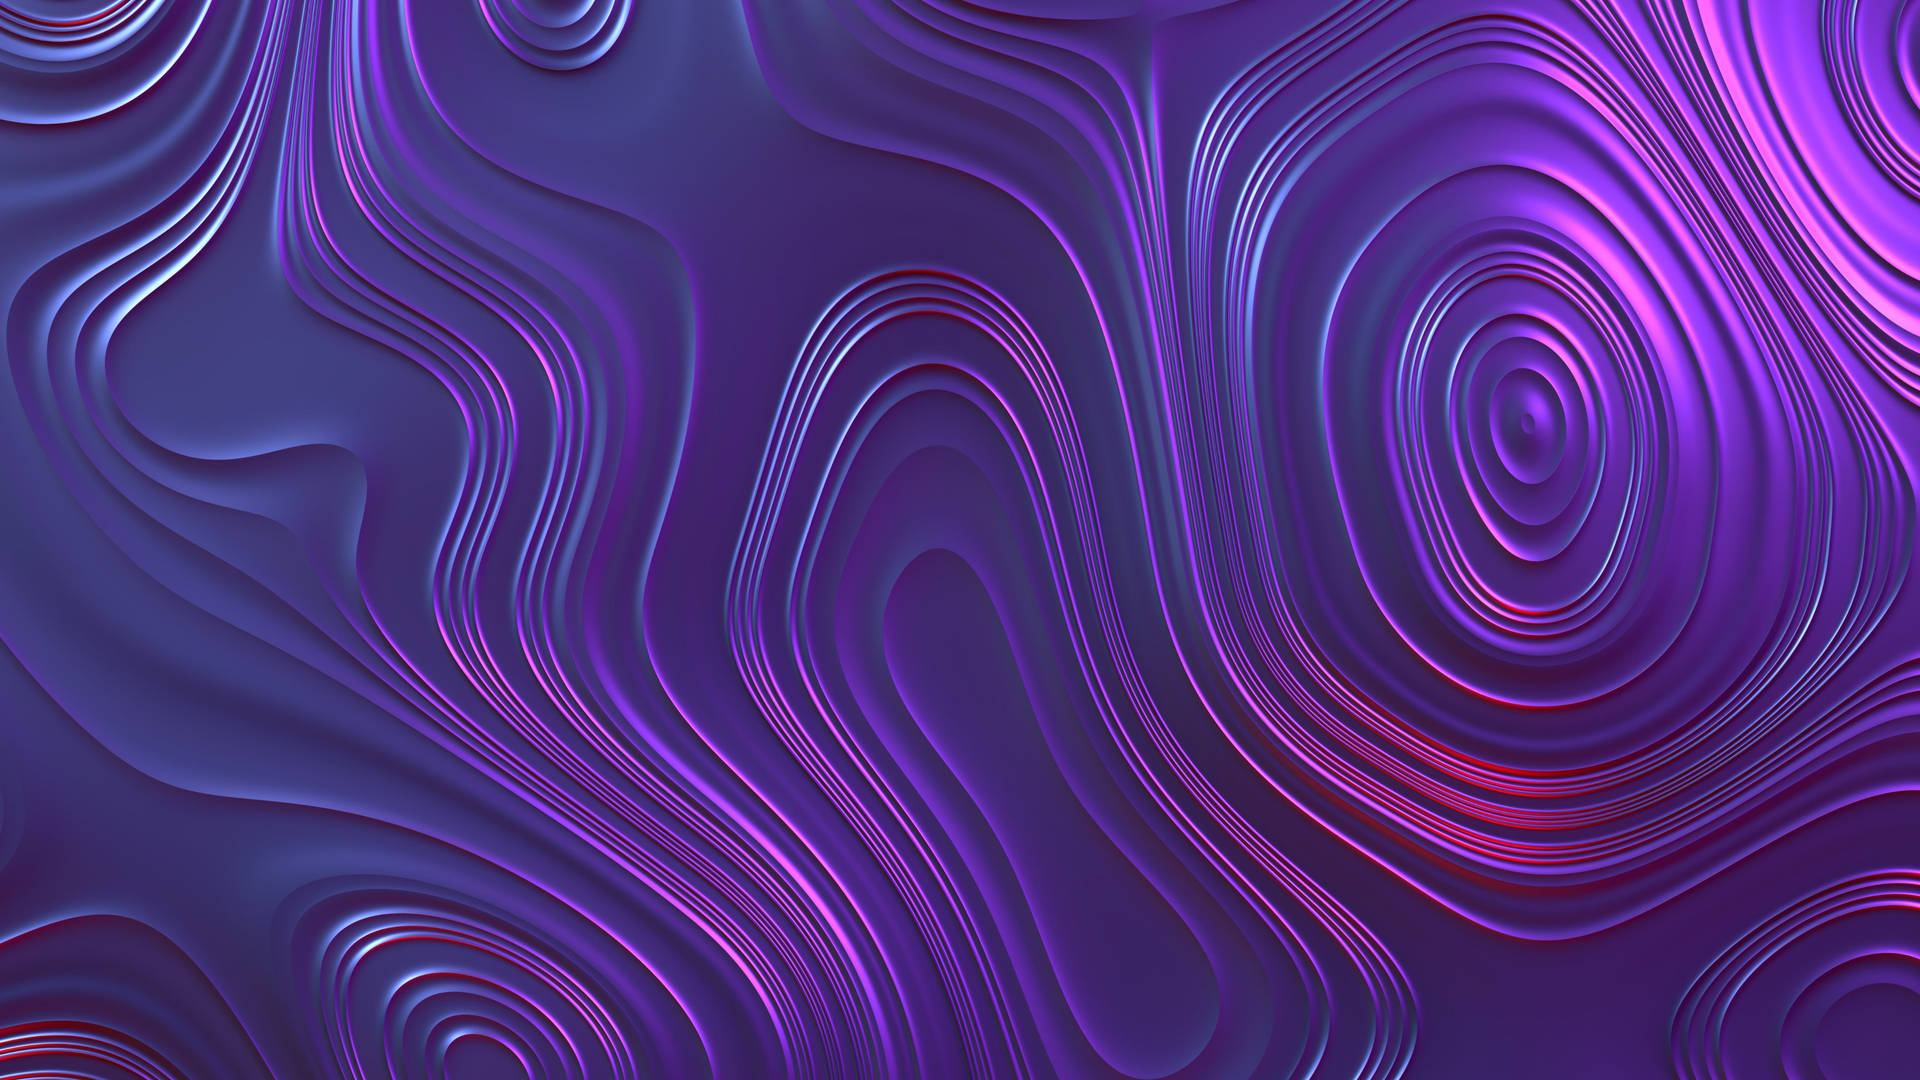 Violet Aesthetic Oval Waves Abstract Background